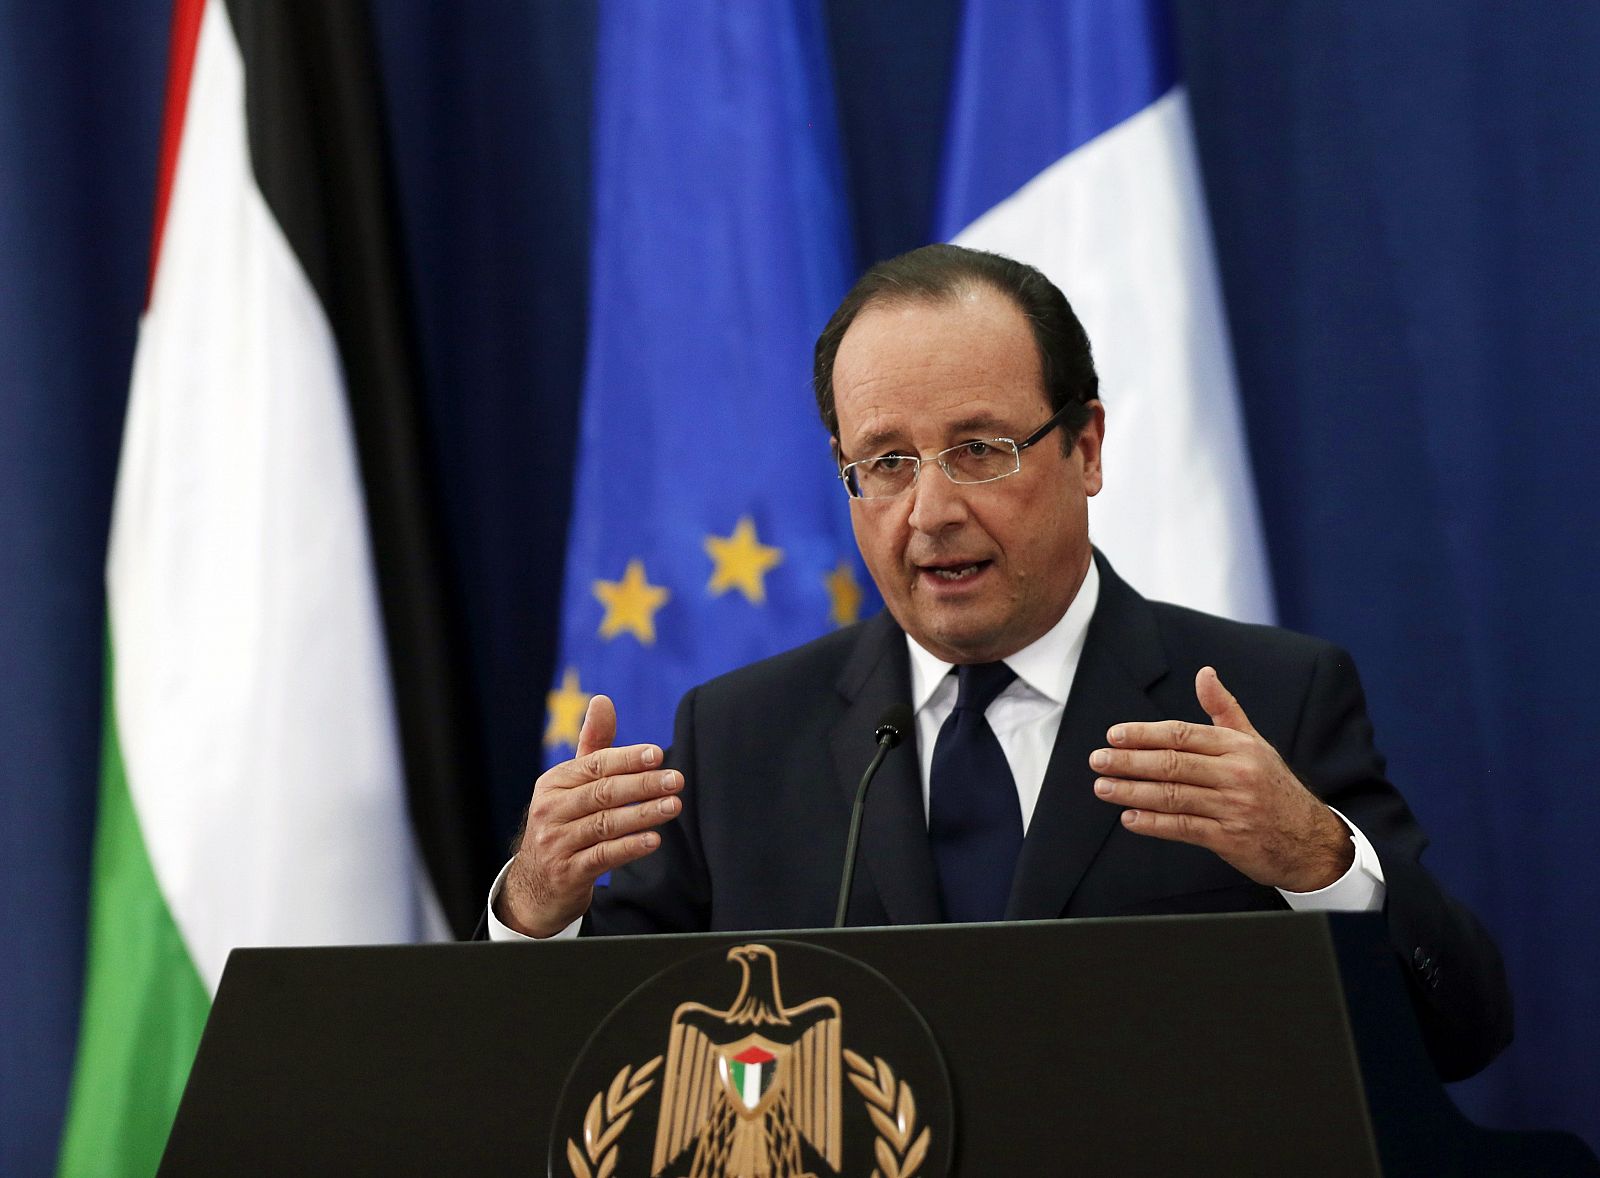 French President Hollande speaks during a joint news conference with his Palestinian counterpart Abbas in Ramallah